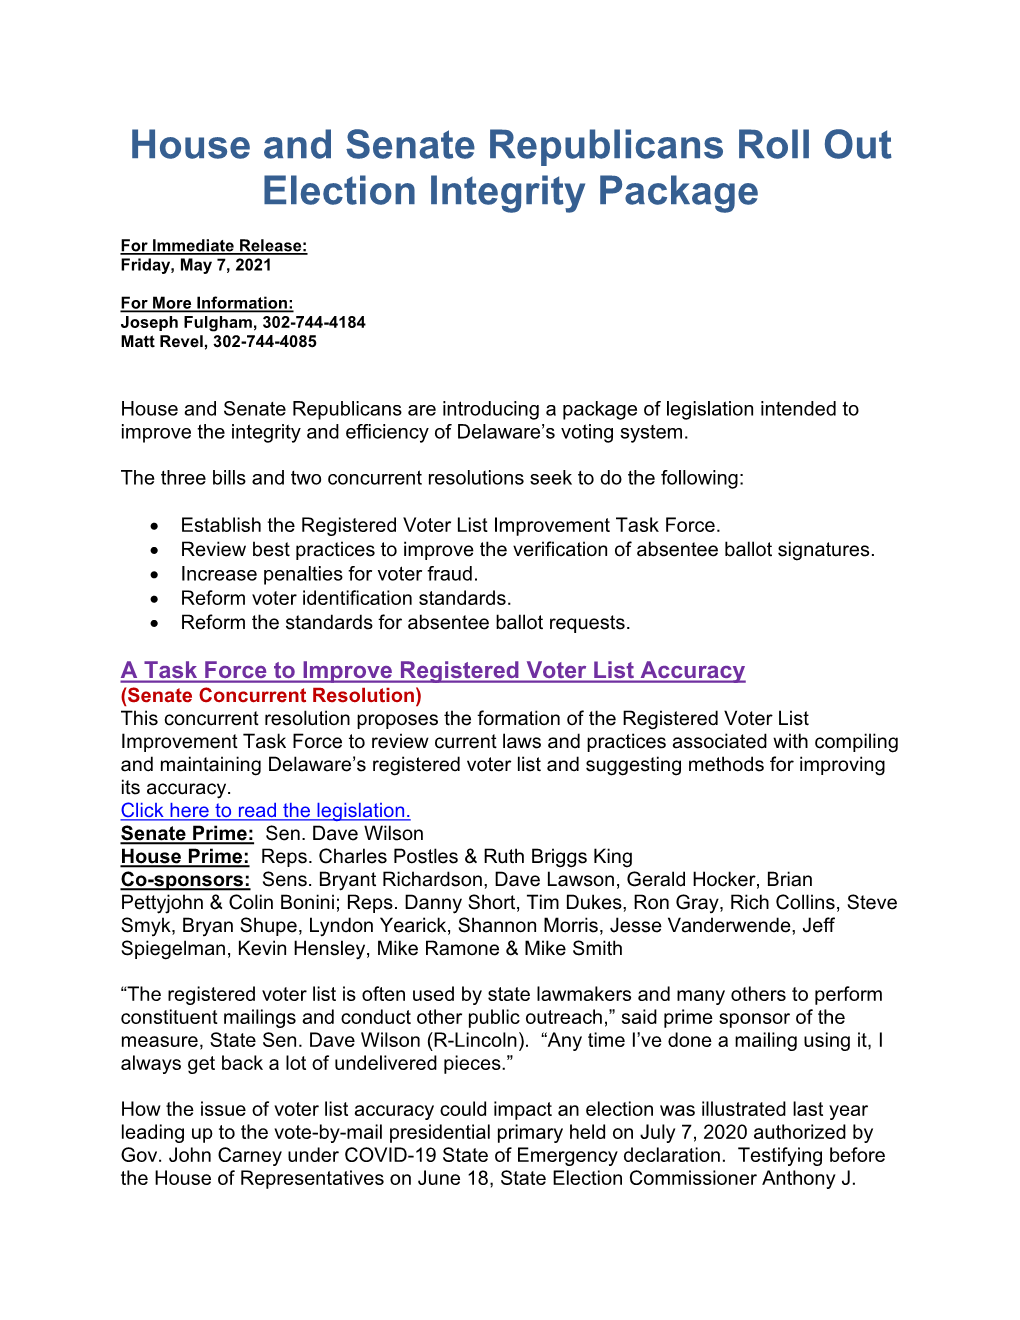 House and Senate Republicans Roll out Election Integrity Package